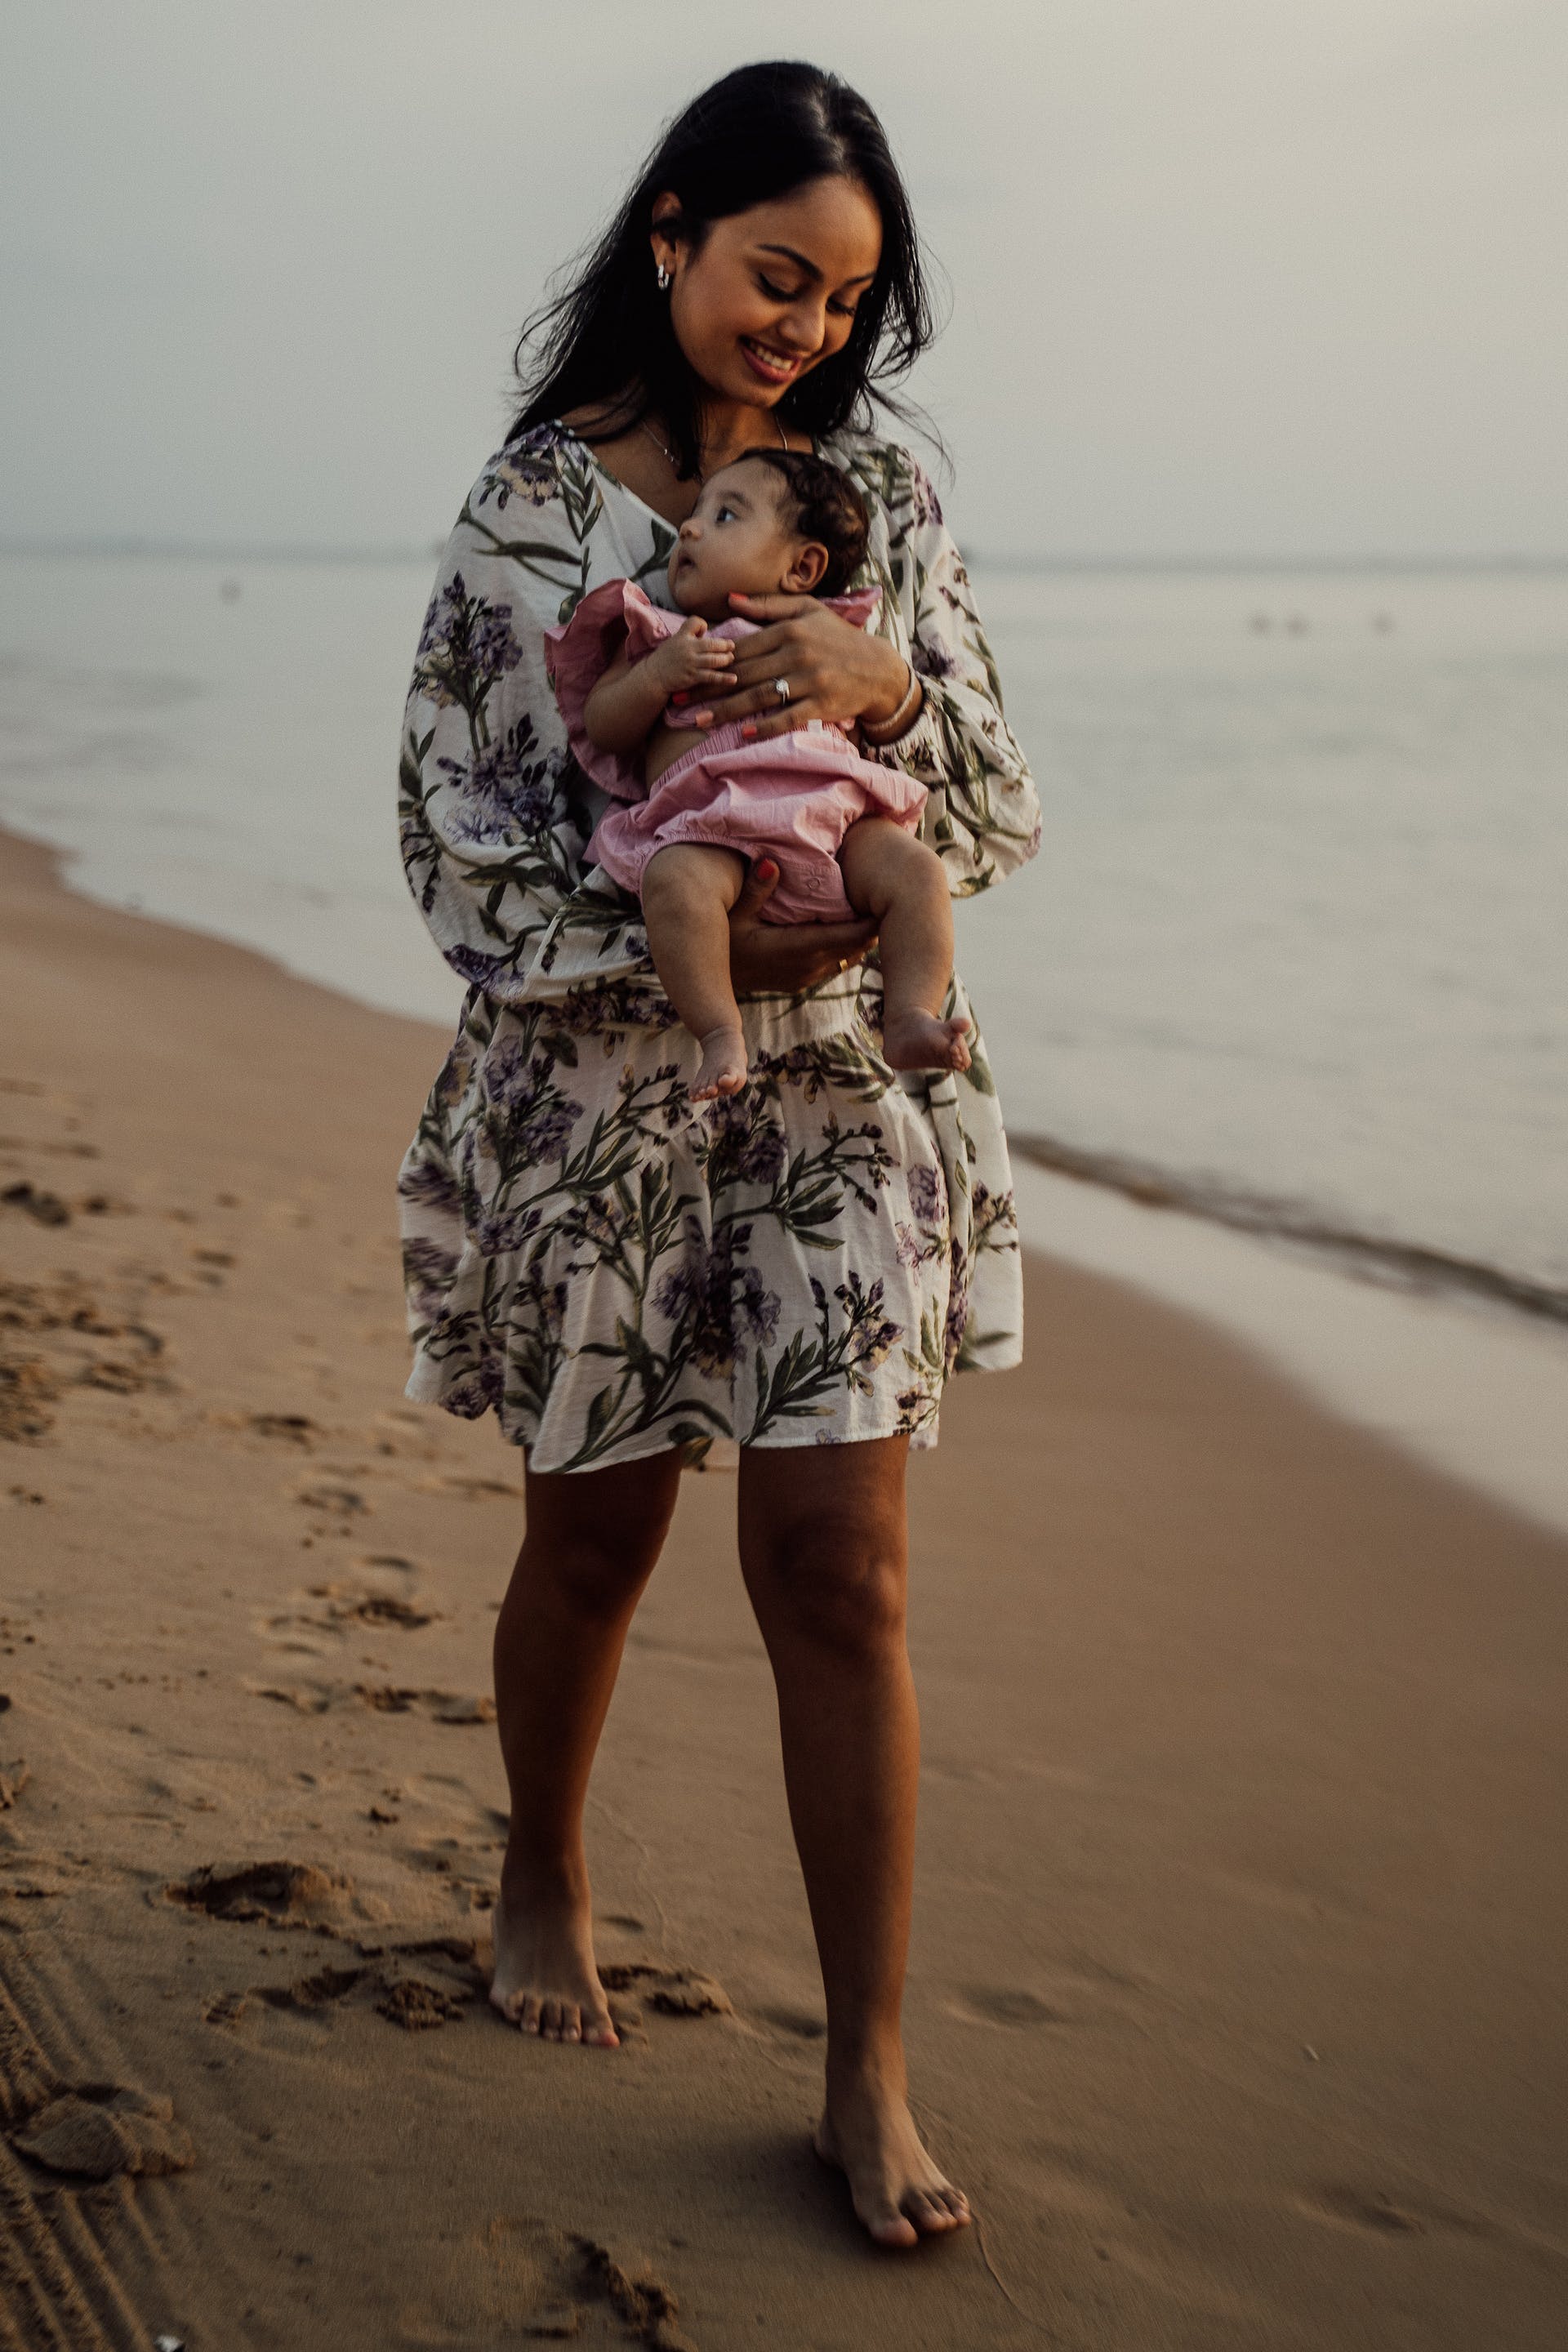 A woman with her baby on the beach | Source: Pexels